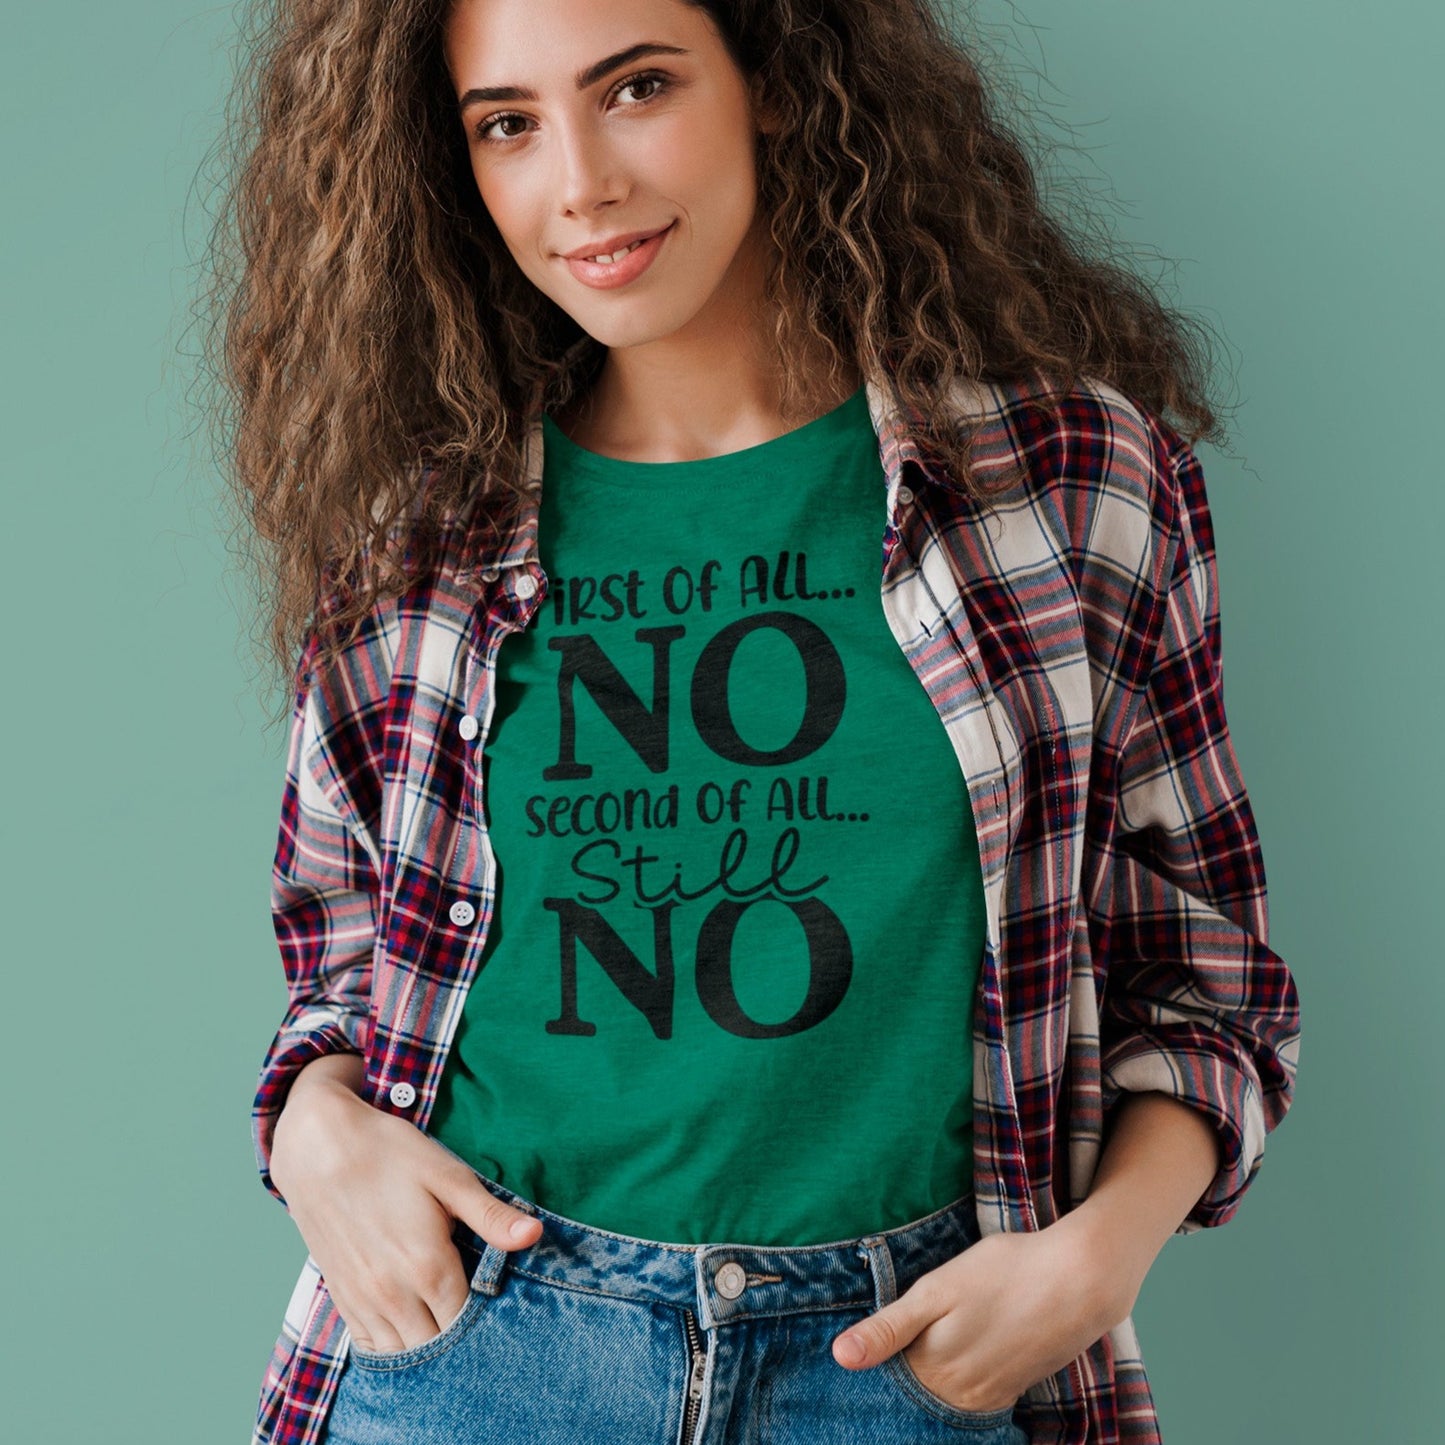 first-of-all-no-second-of-all-no-heather-kelly-green-t-shirt-sarcastic-women-mockup-of-a-curly-haired-woman-wearing-a-t-shirt-under-a-flannel-